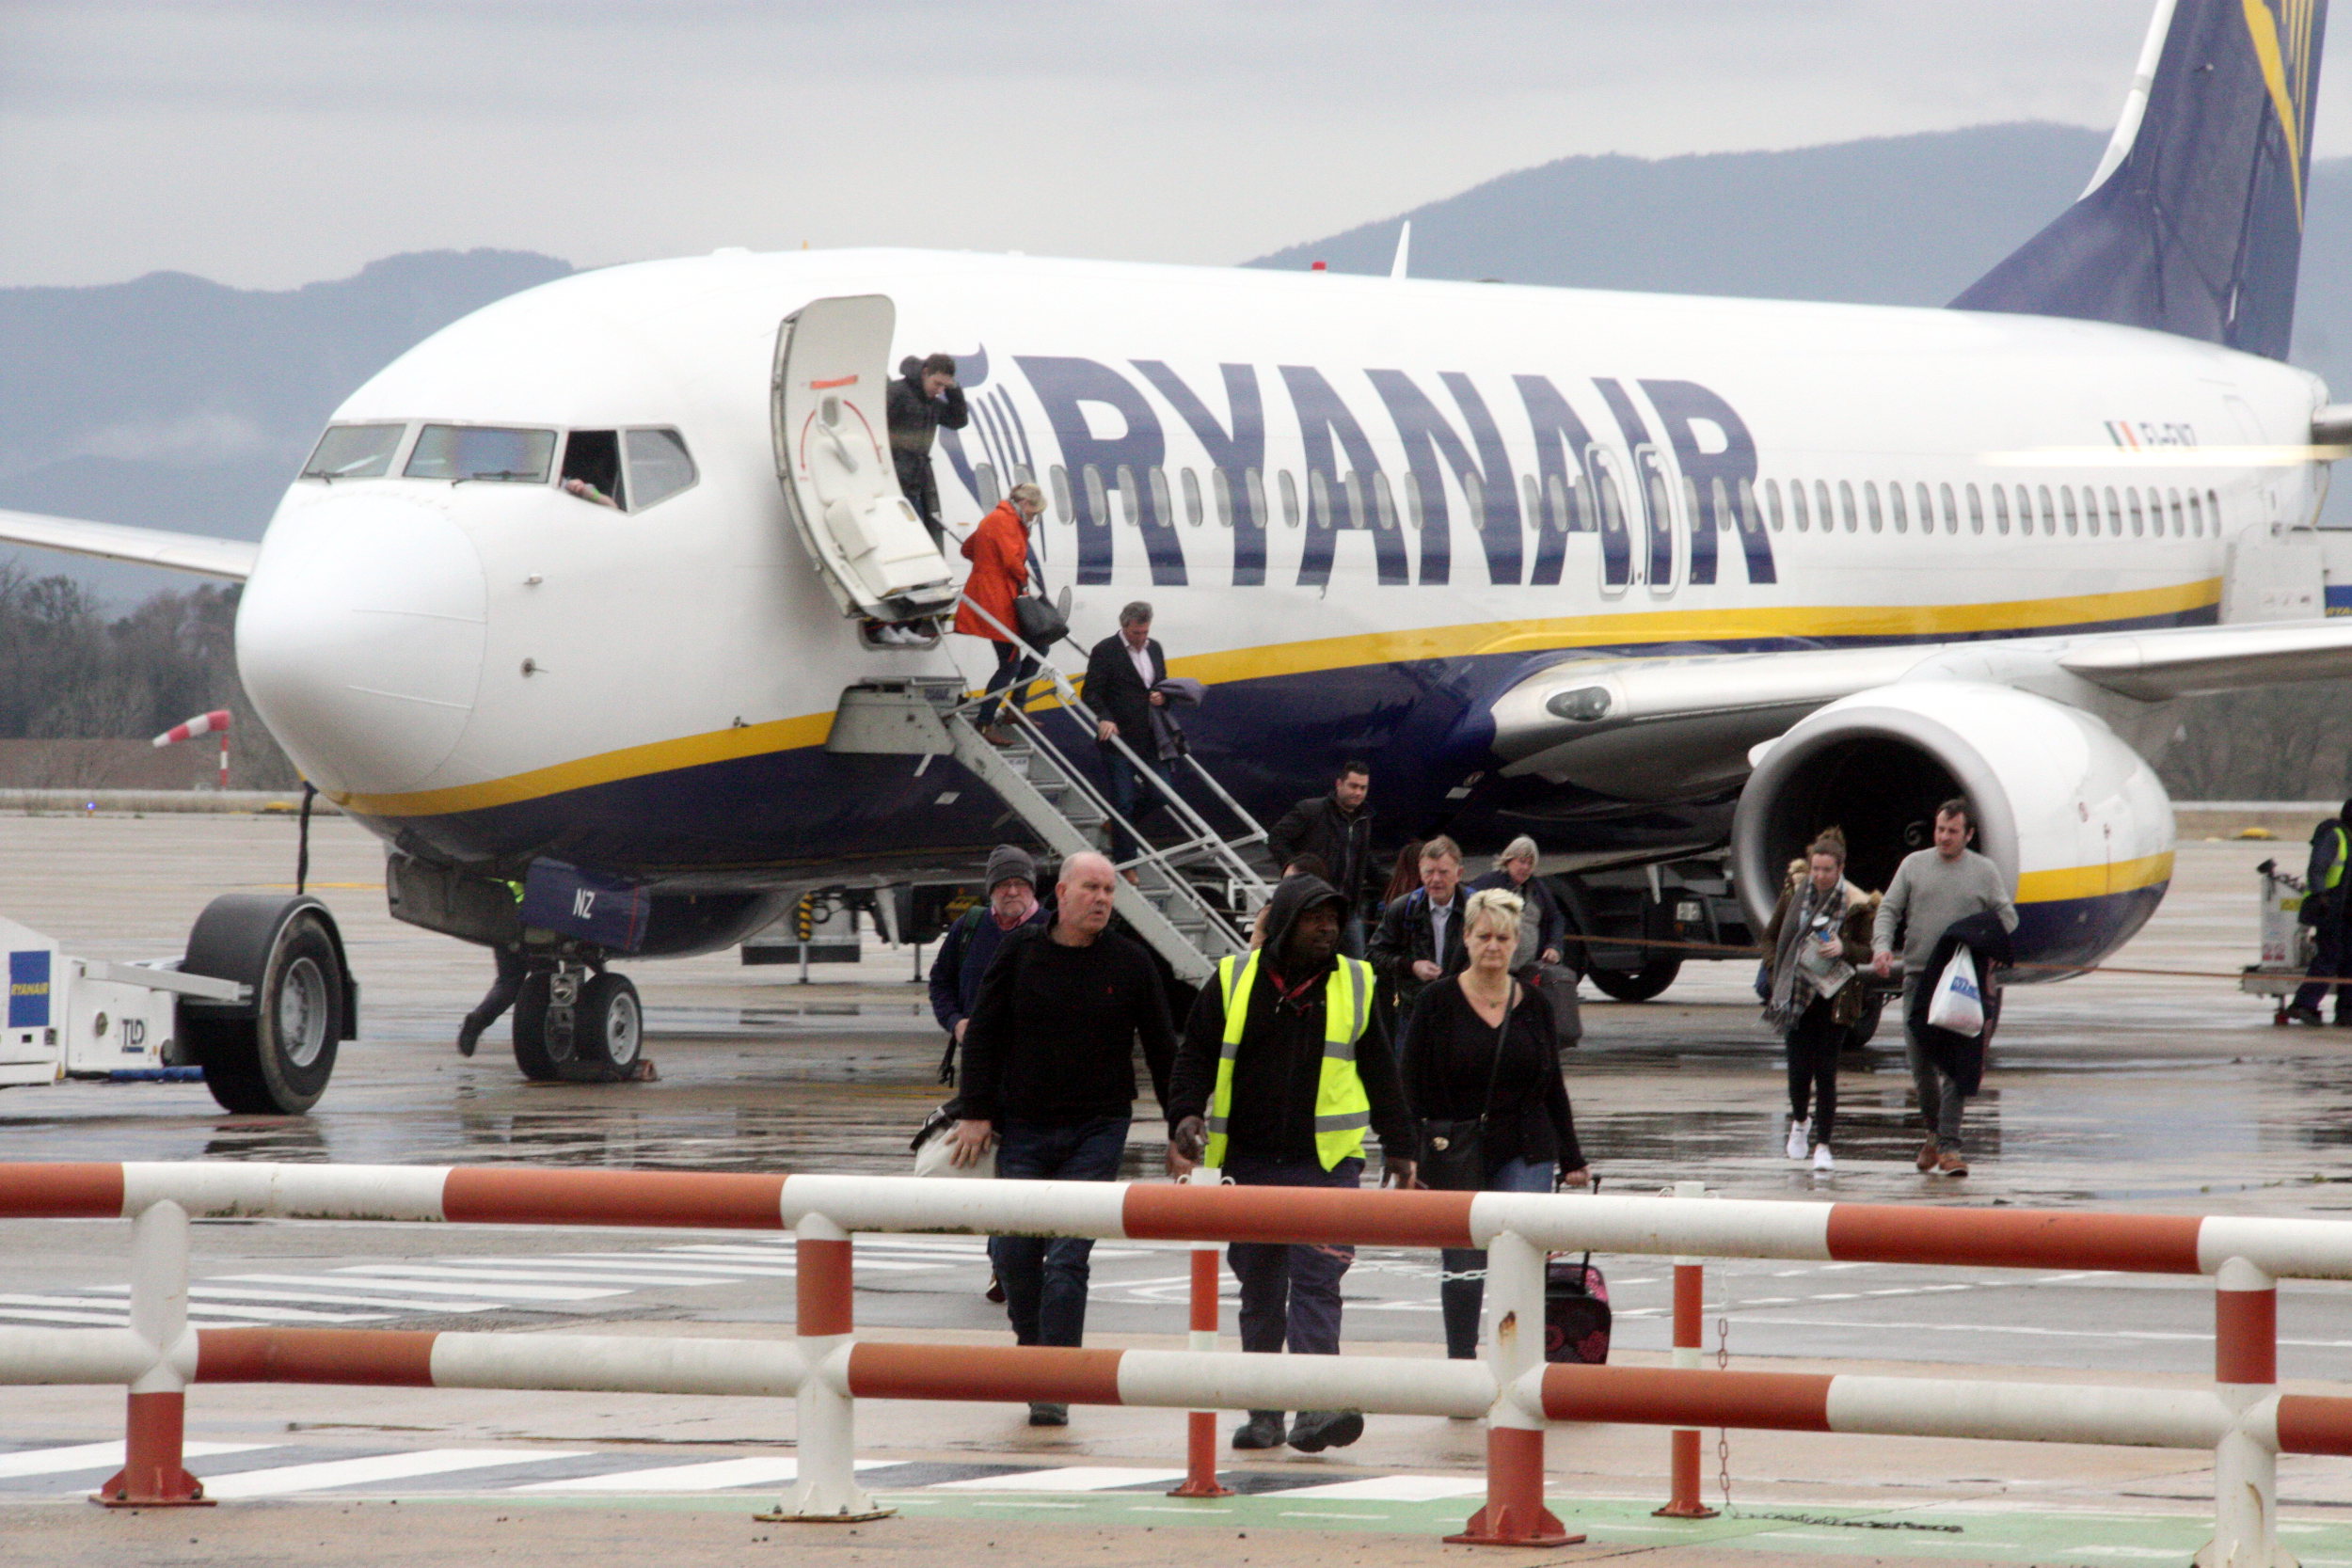 Tourists disembarking a Ryanair plane at the Girona-Costa Brava airport (by ACN)